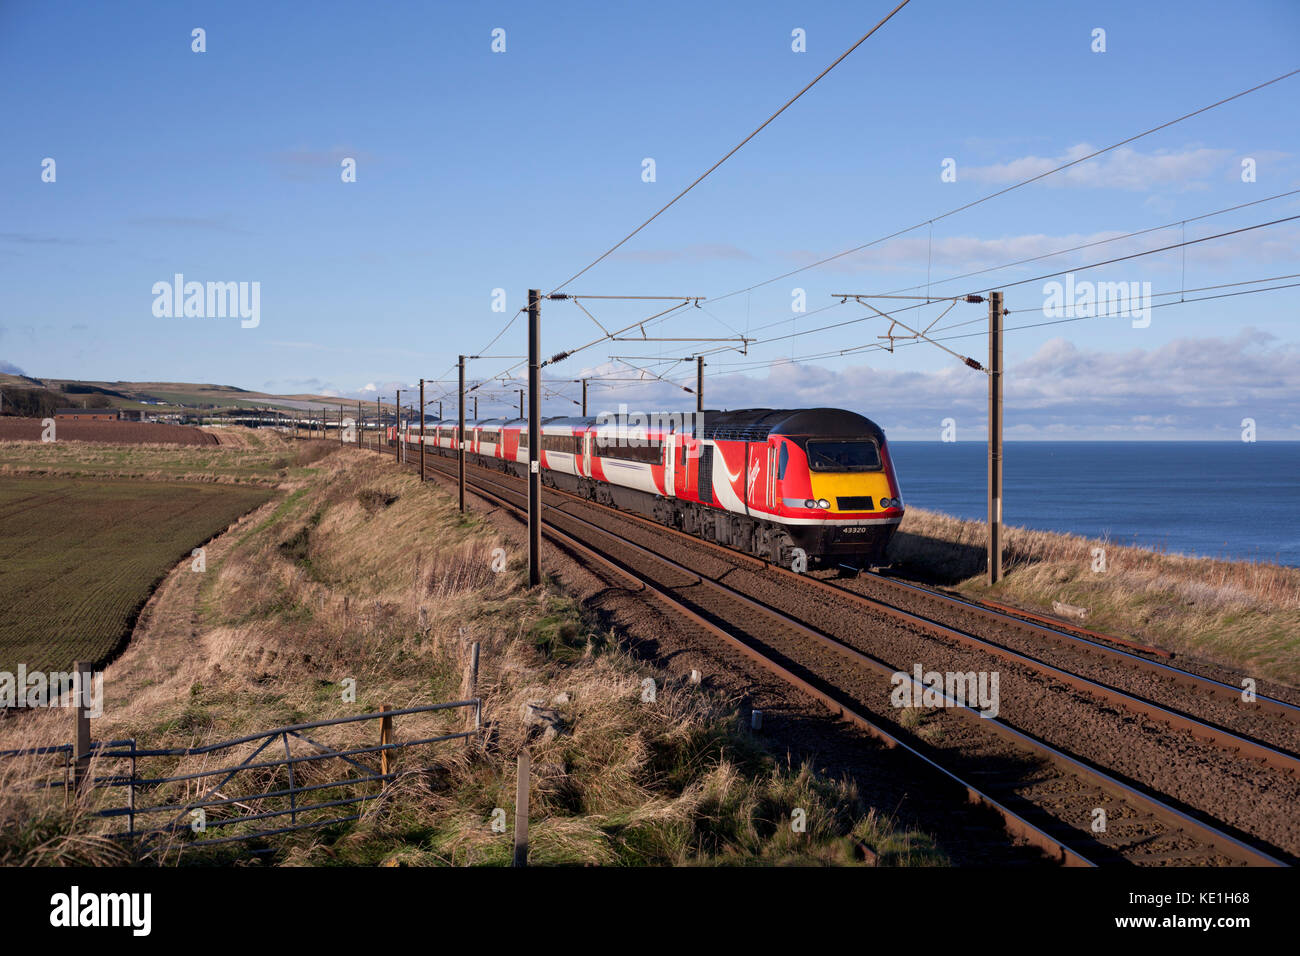 The 0952 Aberdeen - Kings Cross passes  Marshall meadows, (north of Berwick upon Tweed) formed of a Virgin Trains east Coast Intercity 125 Stock Photo